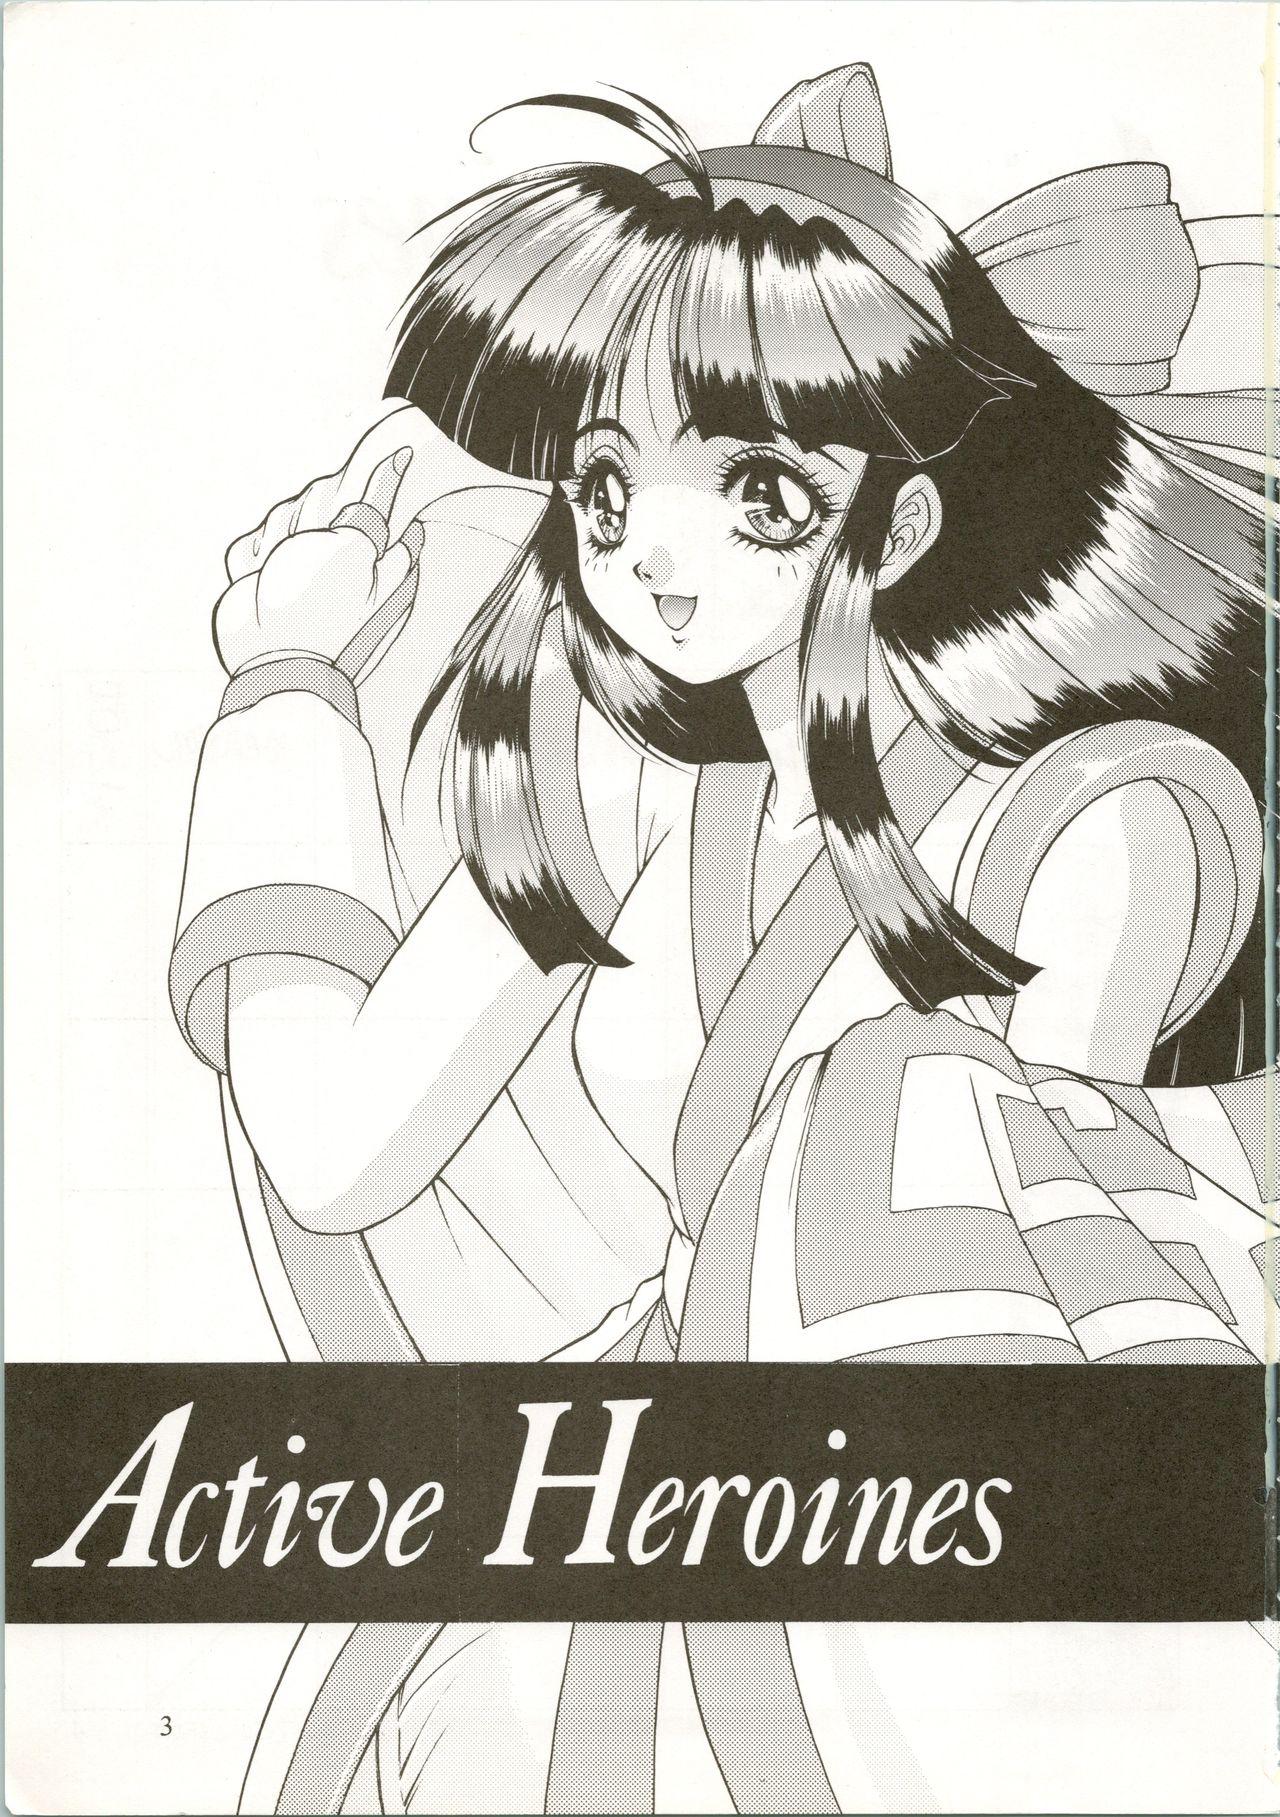 Best Blow Job Active Heroines - Samurai spirits Dragon quest iv Dragon quest v Super mario brothers Gay Physicals - Page 3